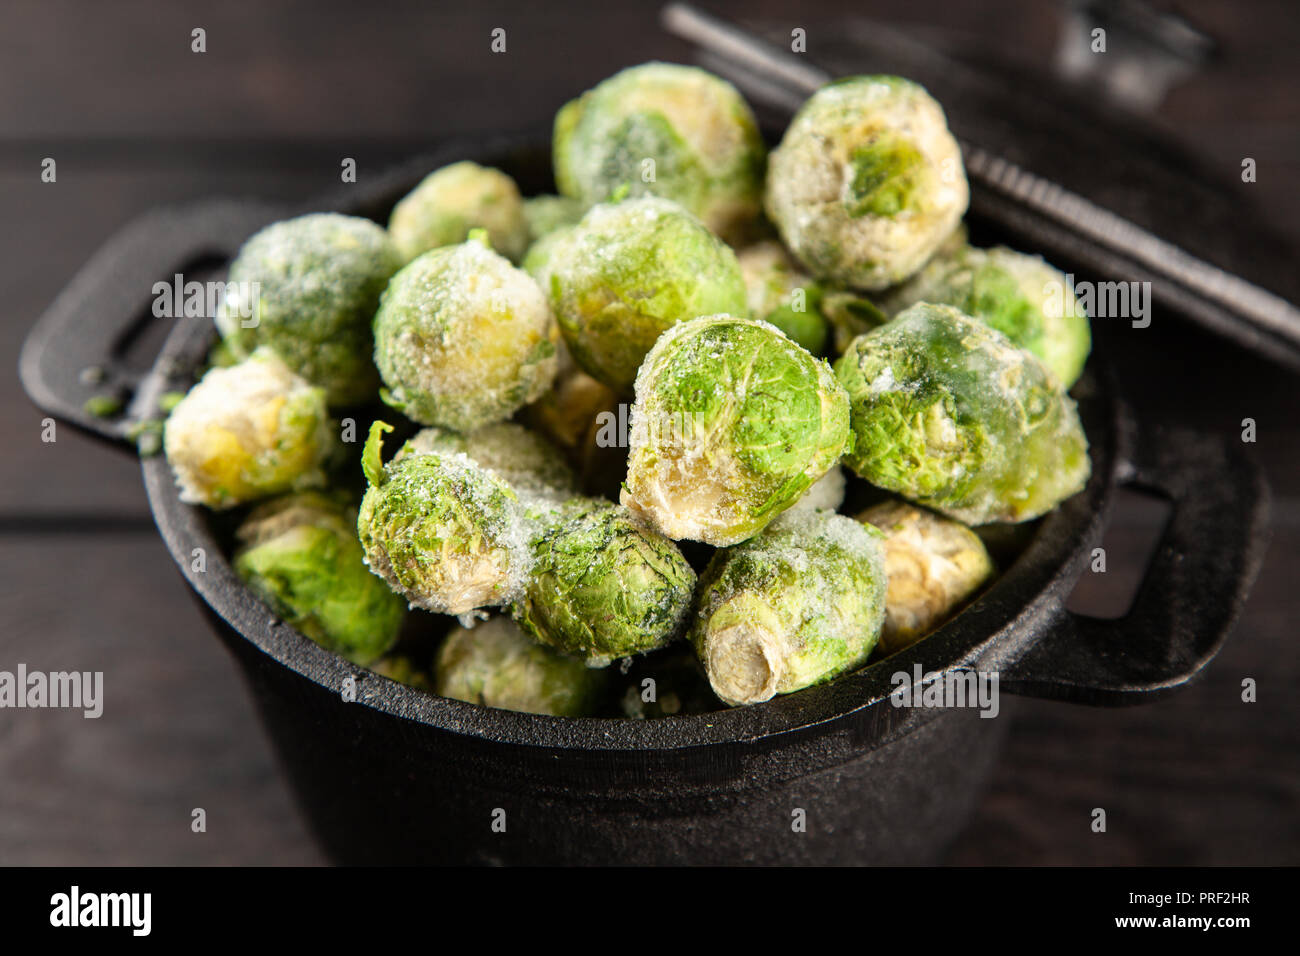 Frozen brussles sprouts Stock Photo